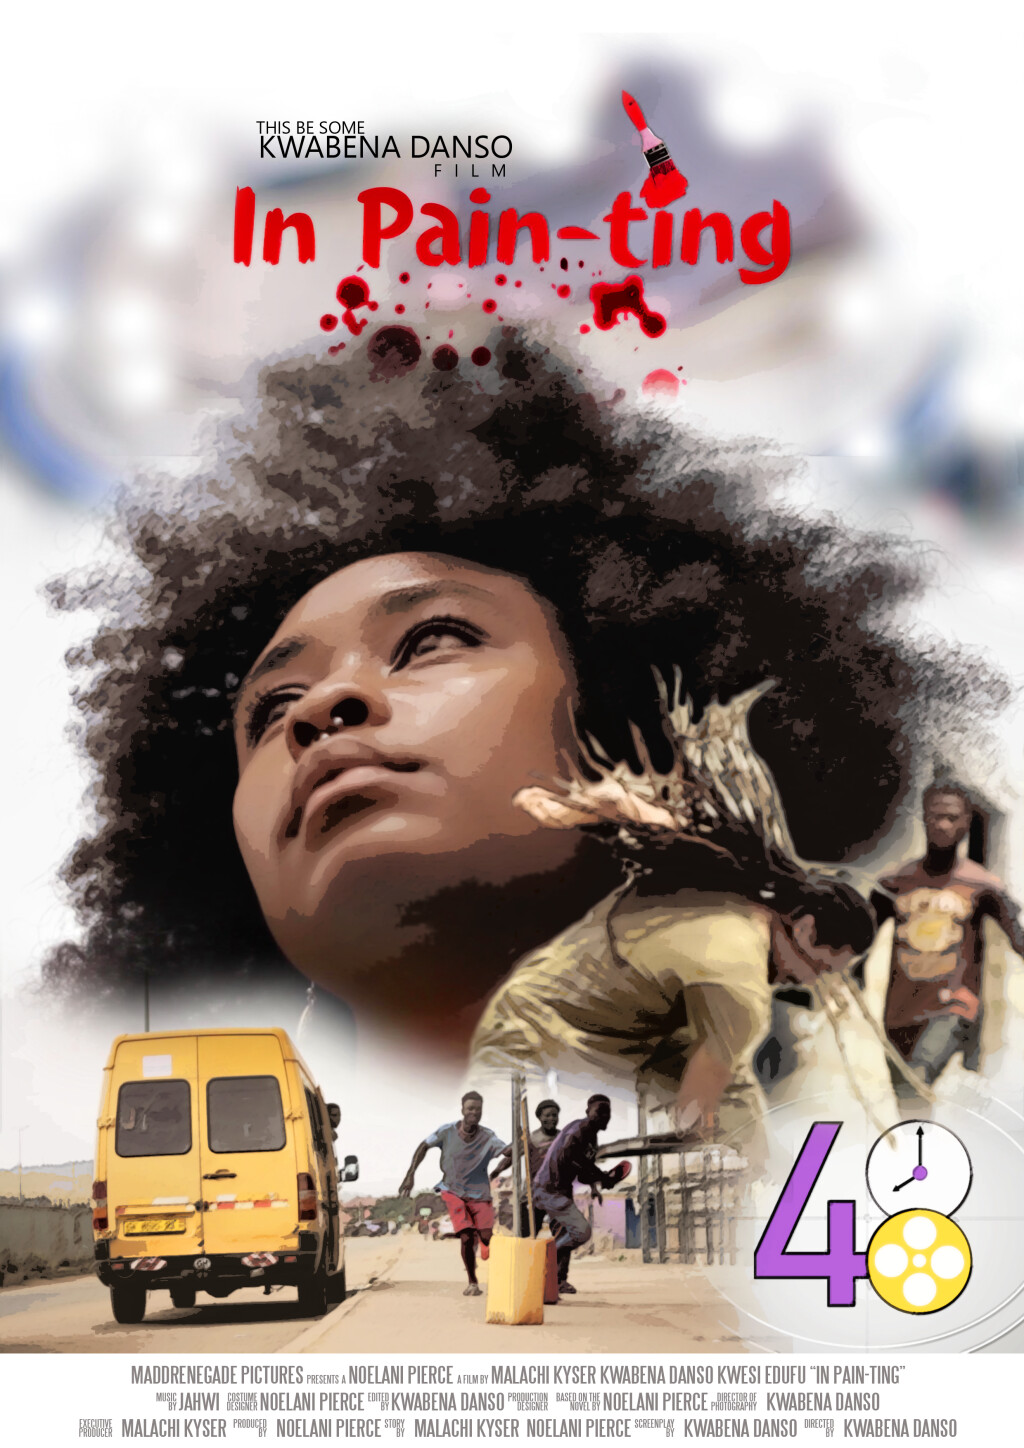 Filmposter for In Pain-Ting